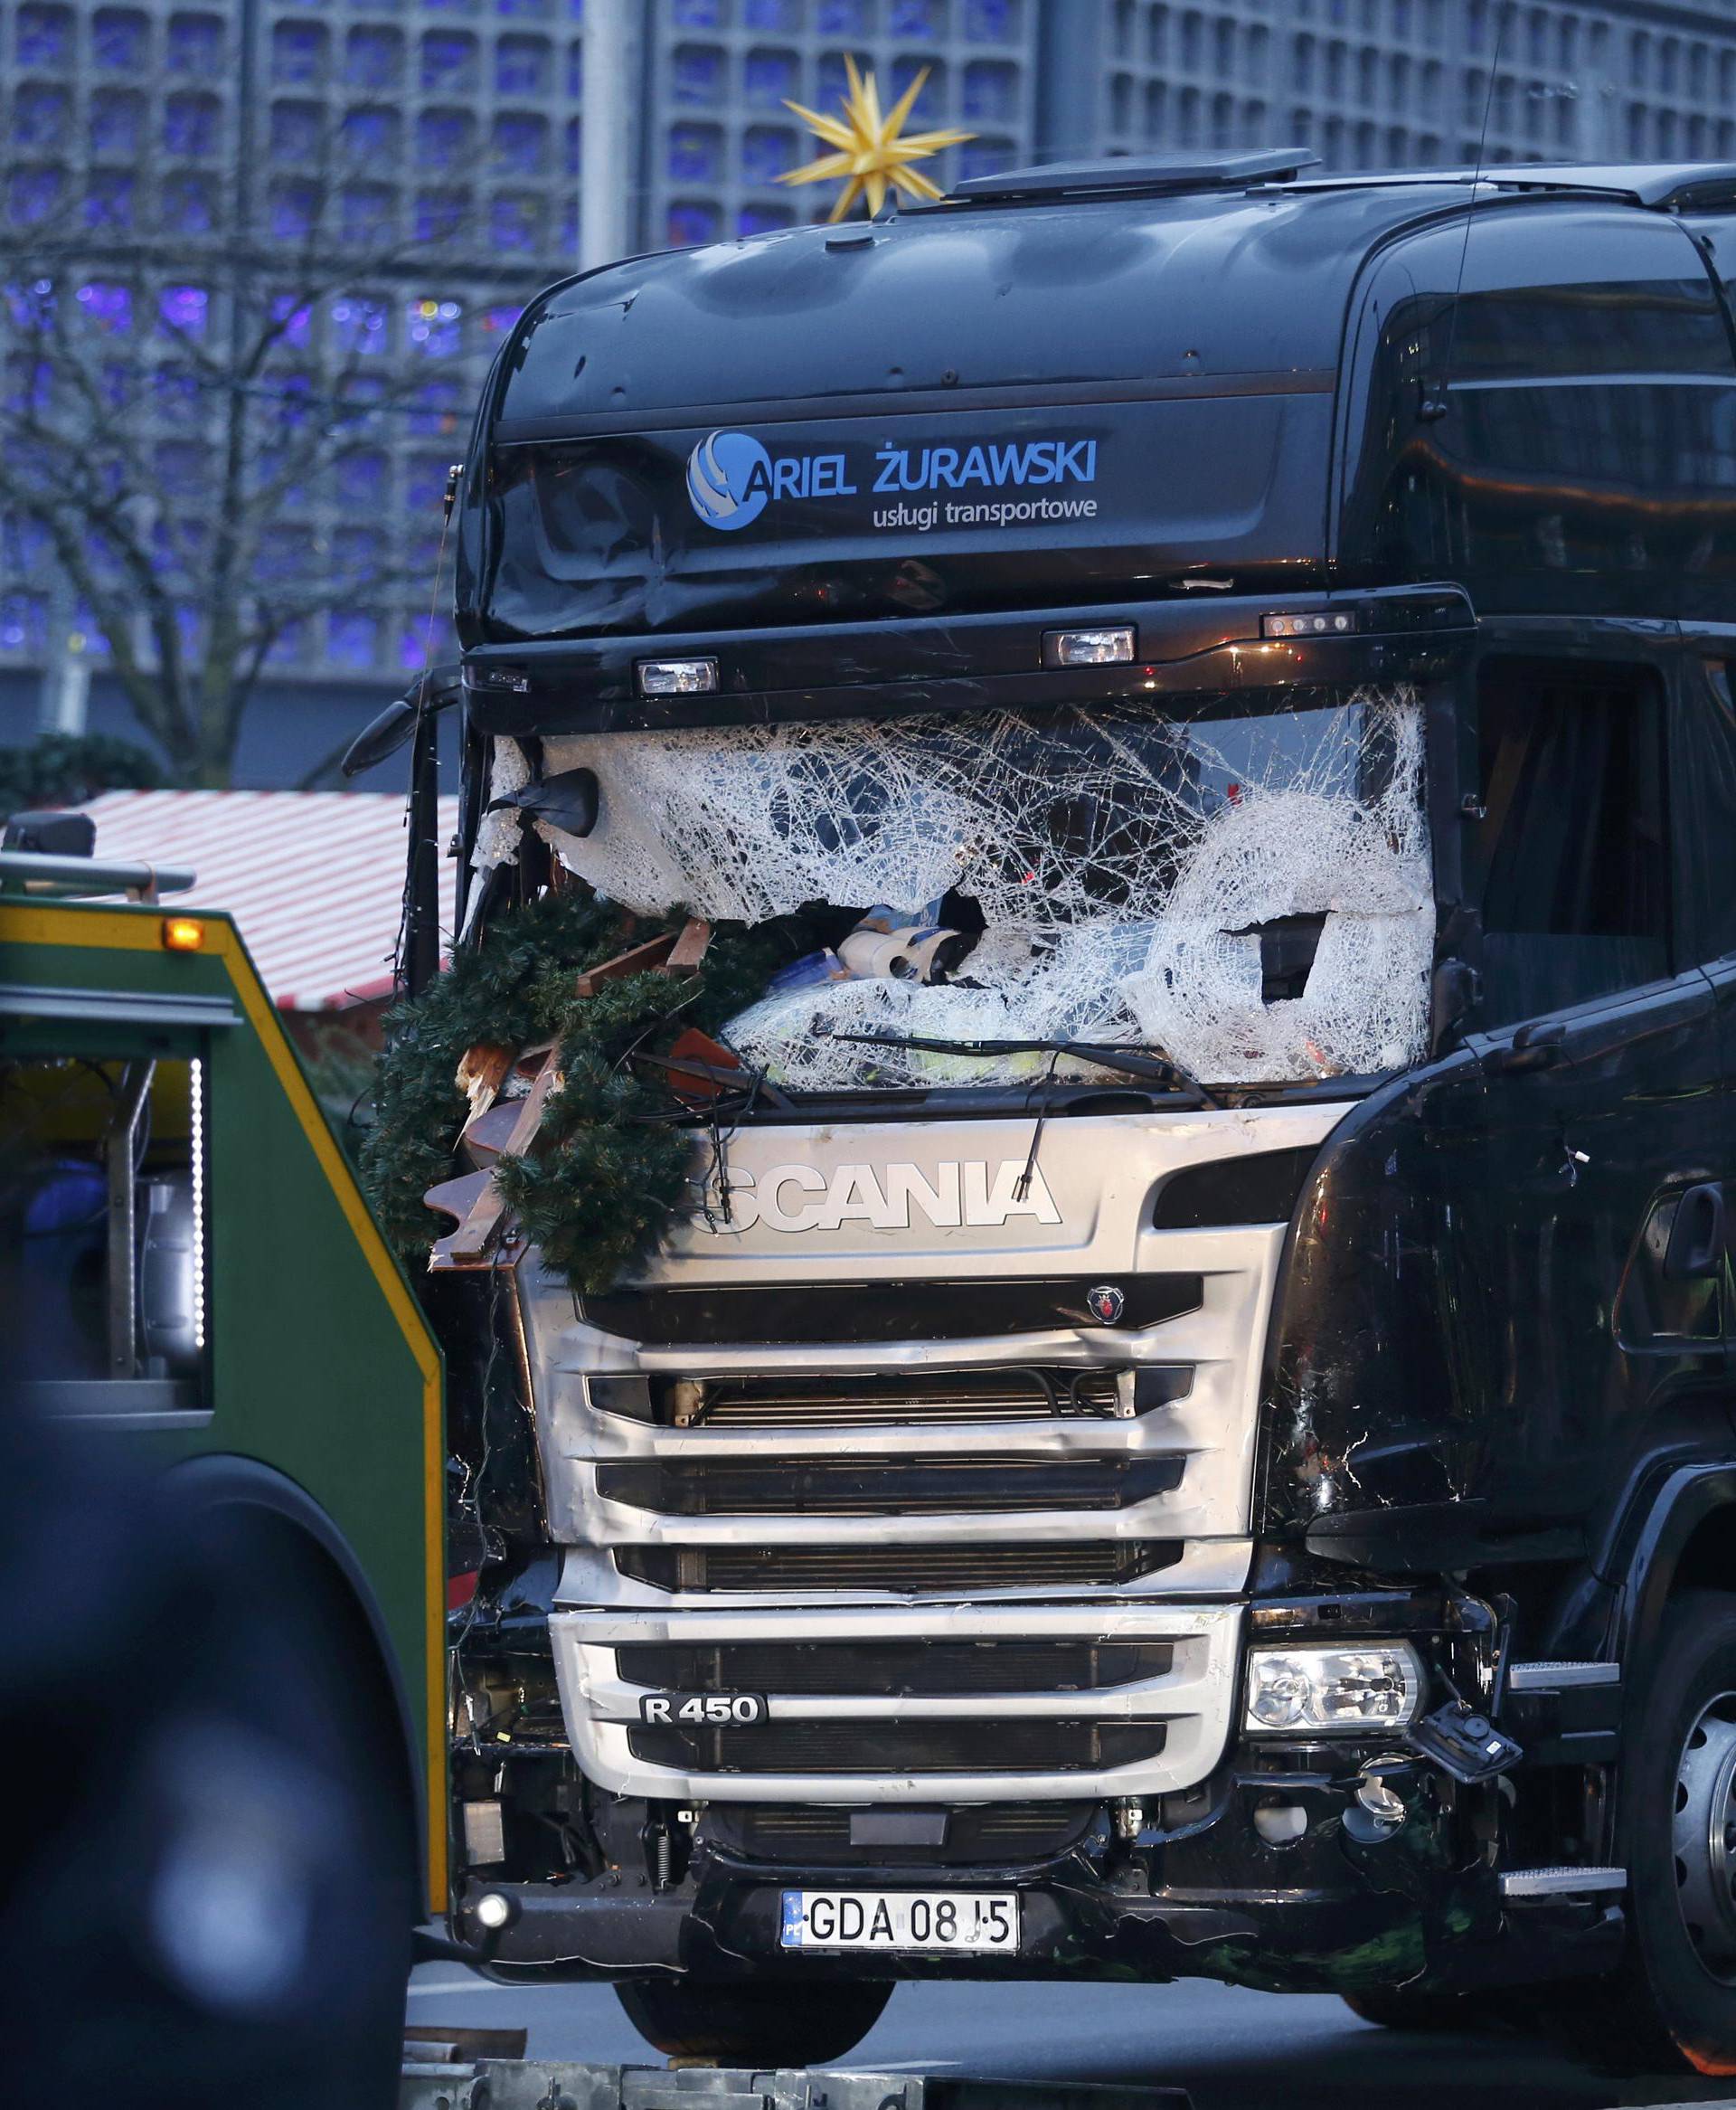 The crashed window of a truck is seen at a Berlin Christmas market